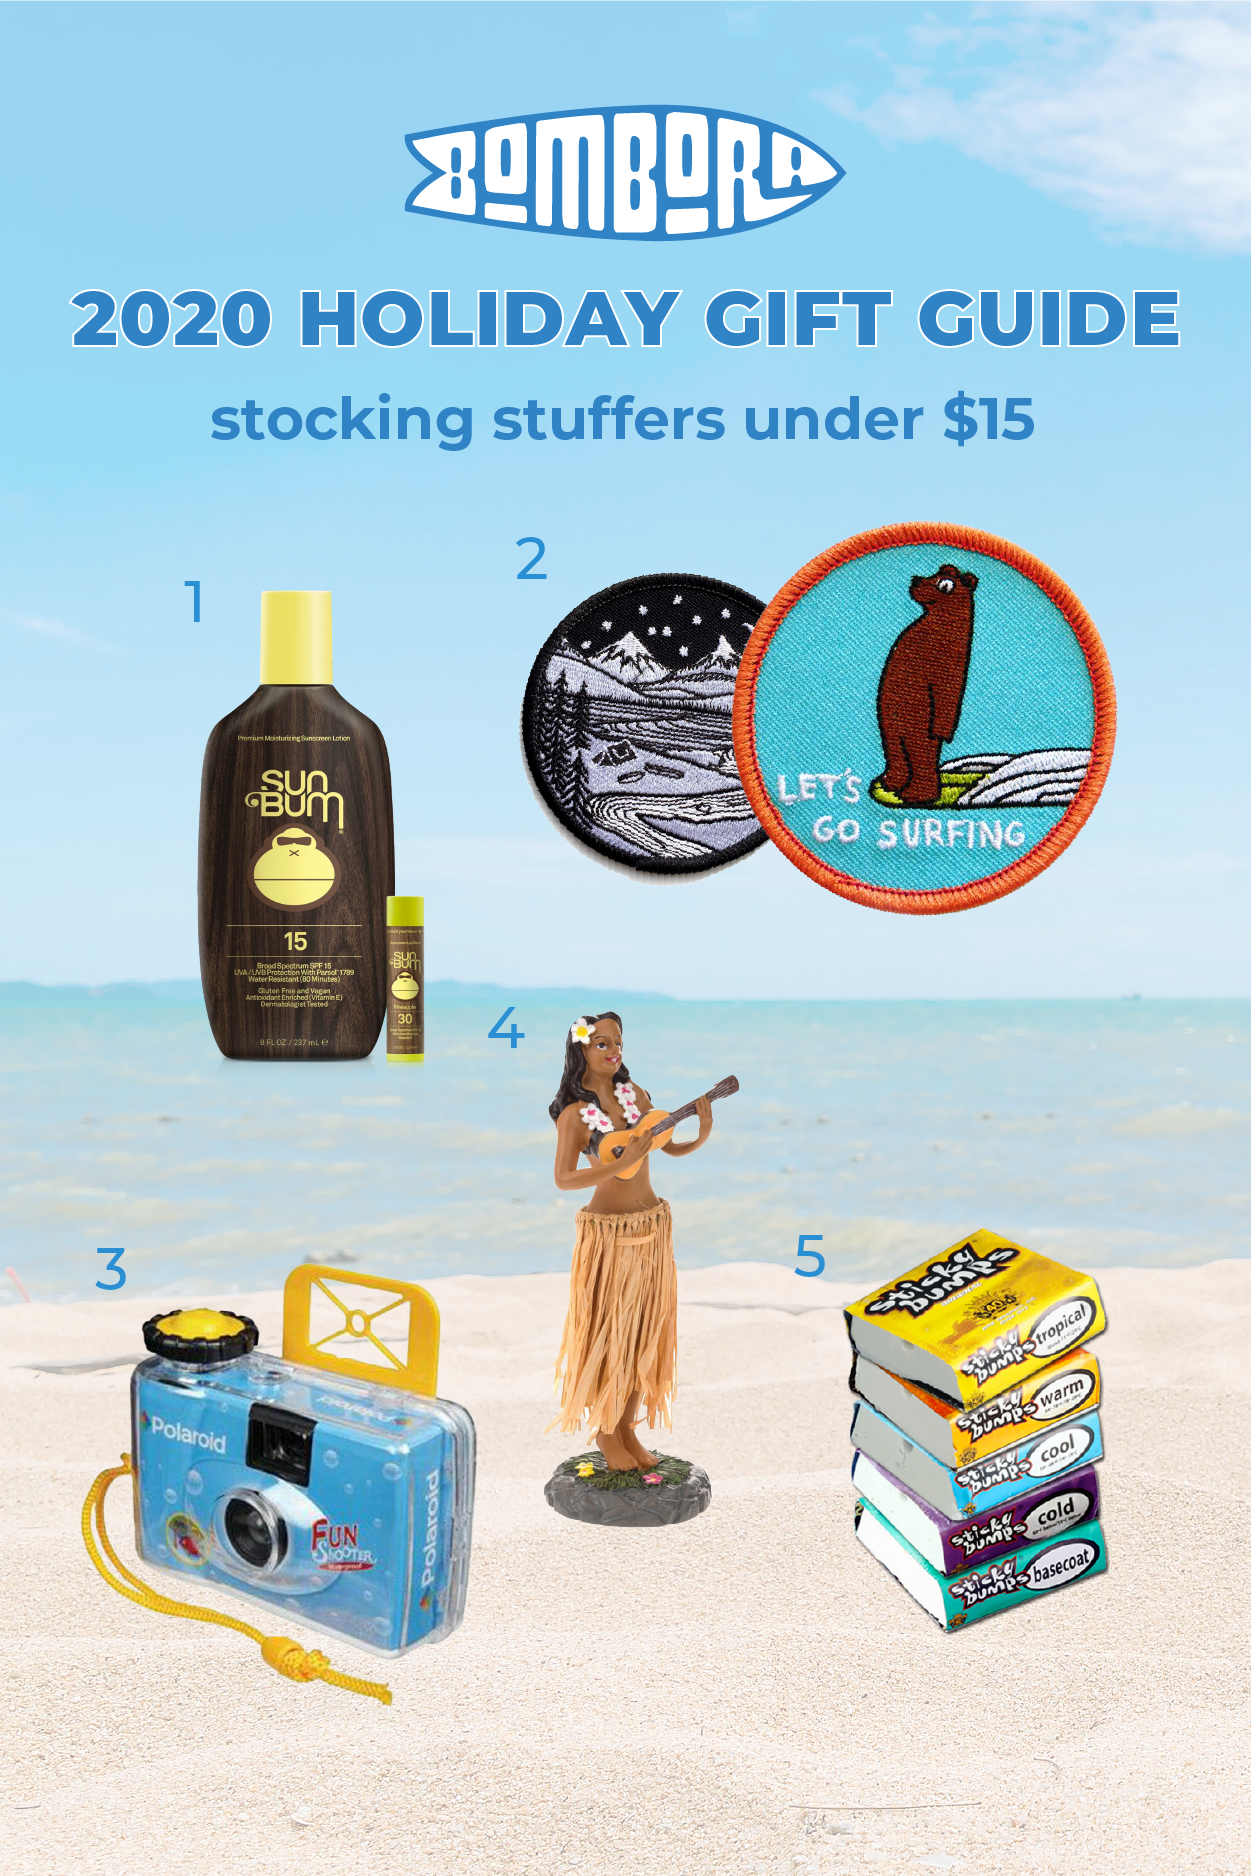 Holiday Gift Guide 2020: unique, cool ideas for dad, brother, boyfriend, boss.. Stocking stuffers under $15. Sunbum sunscreen and lipbam. Jonas Claesson let's go surfing patch. Waterproof disposable camera. Dashboard hula girl. Surf wax variety pack.